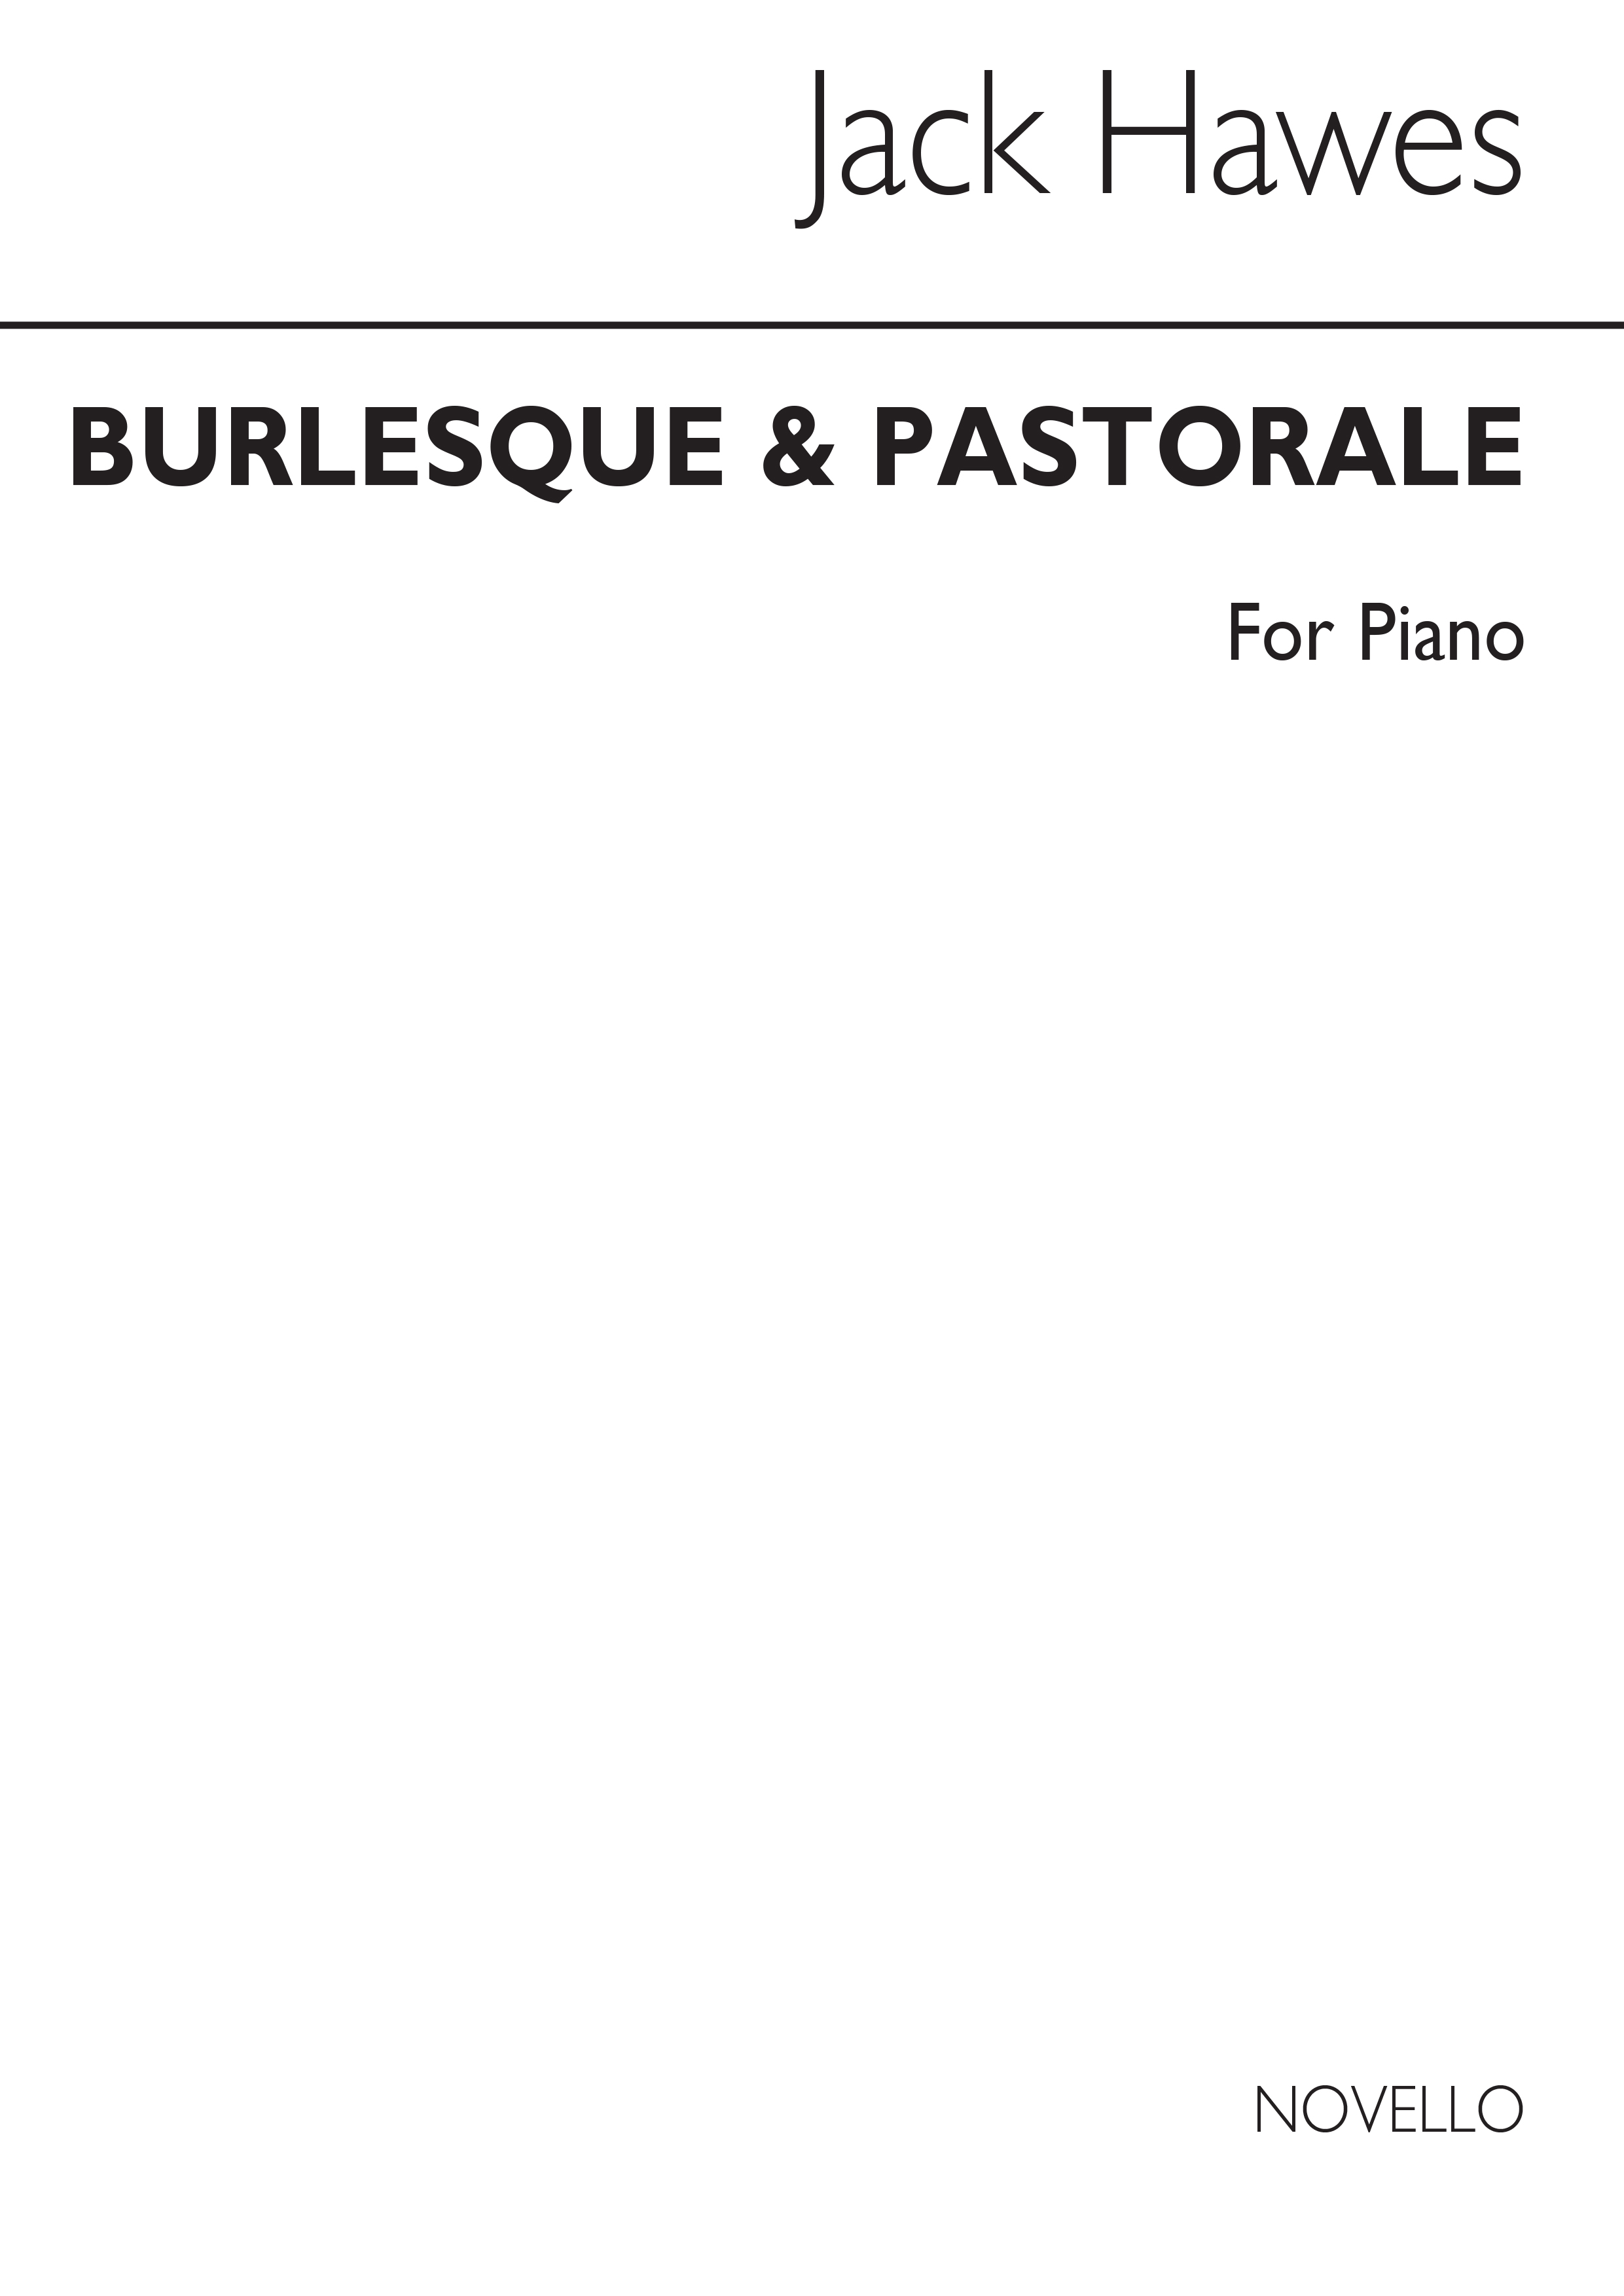 Jack Hawes: Burlesque And Pastorale For Piano